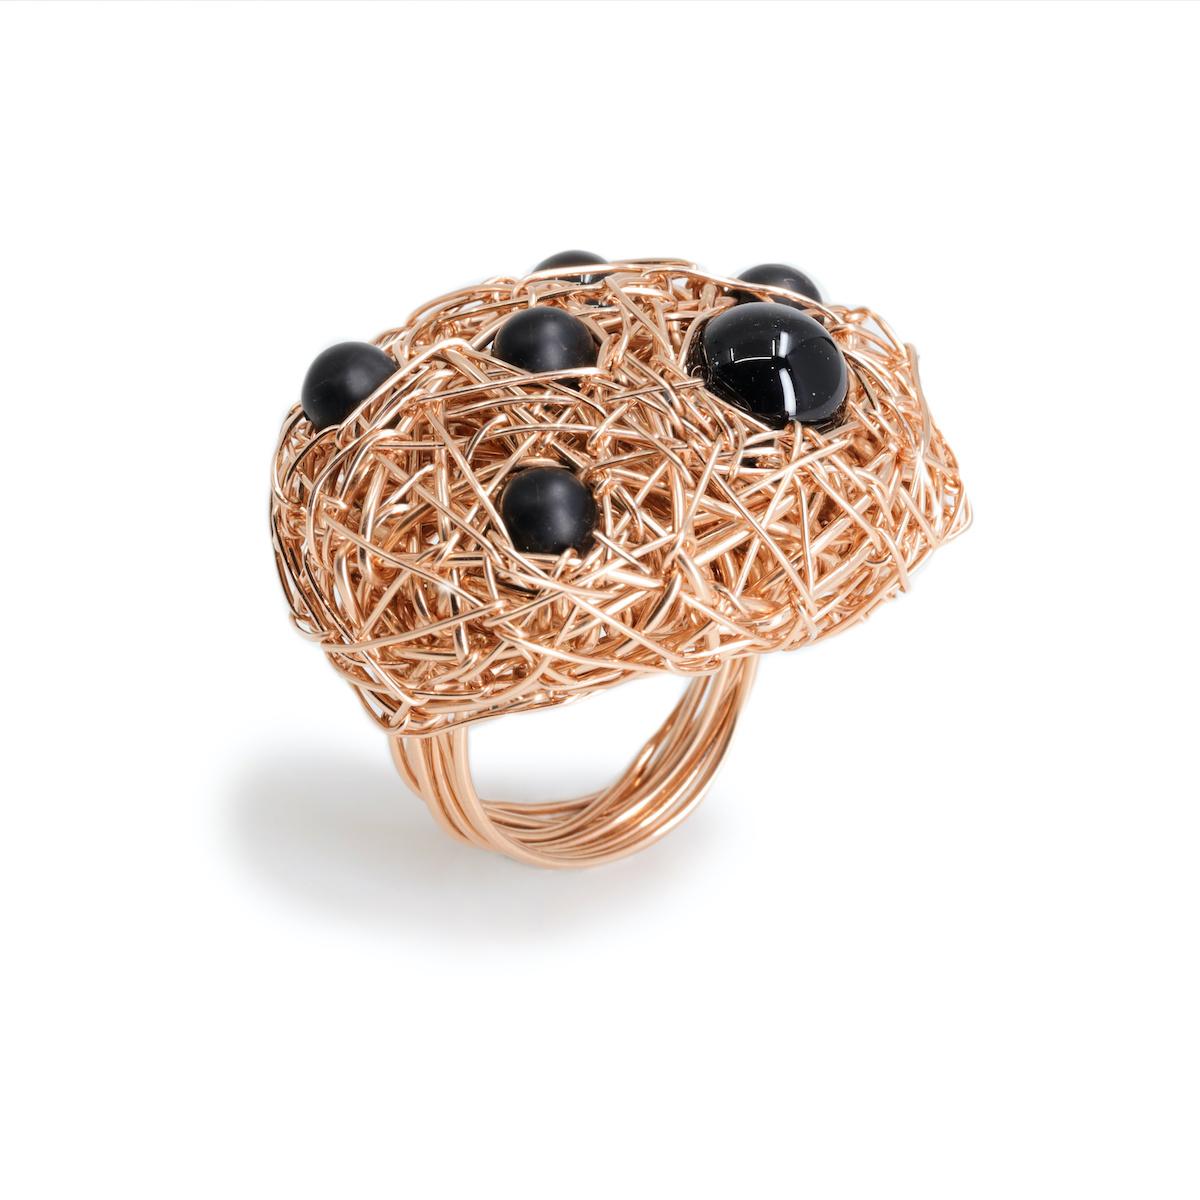 Onyx Cocktail Ring a One-of-a-kind in 14 Karat Rose Gold Filled by the Artist For Sale 1